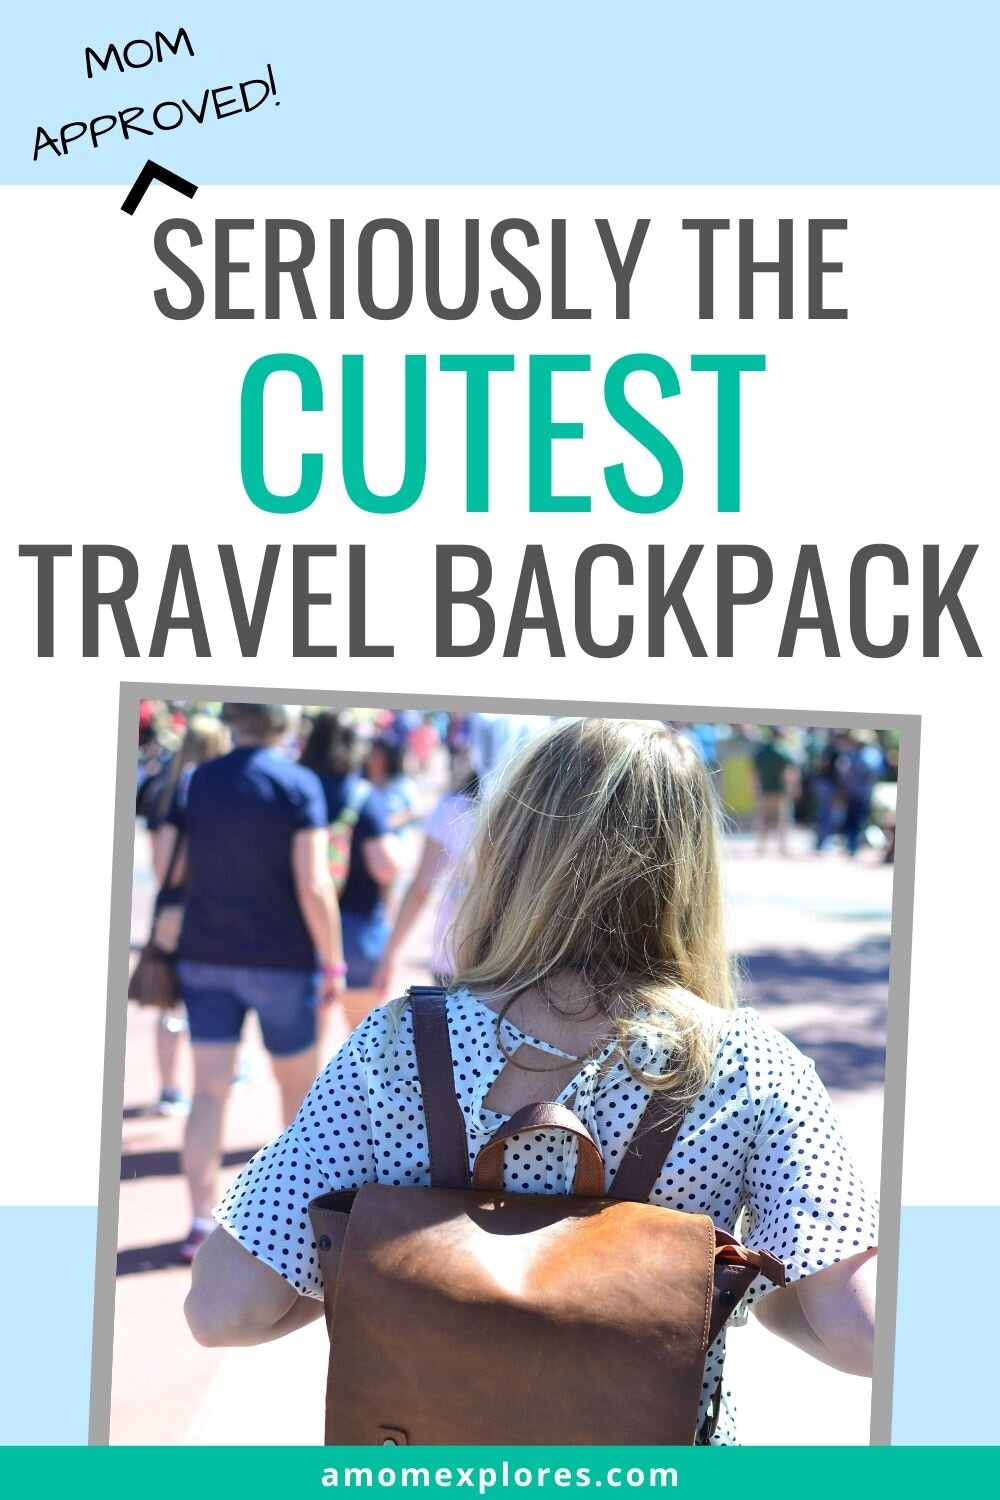 Moms need this cute travel backpack for women. It's casual, perfect for summer, and goes with any outfit. You'll love this cute backpack for day trips!.jpg